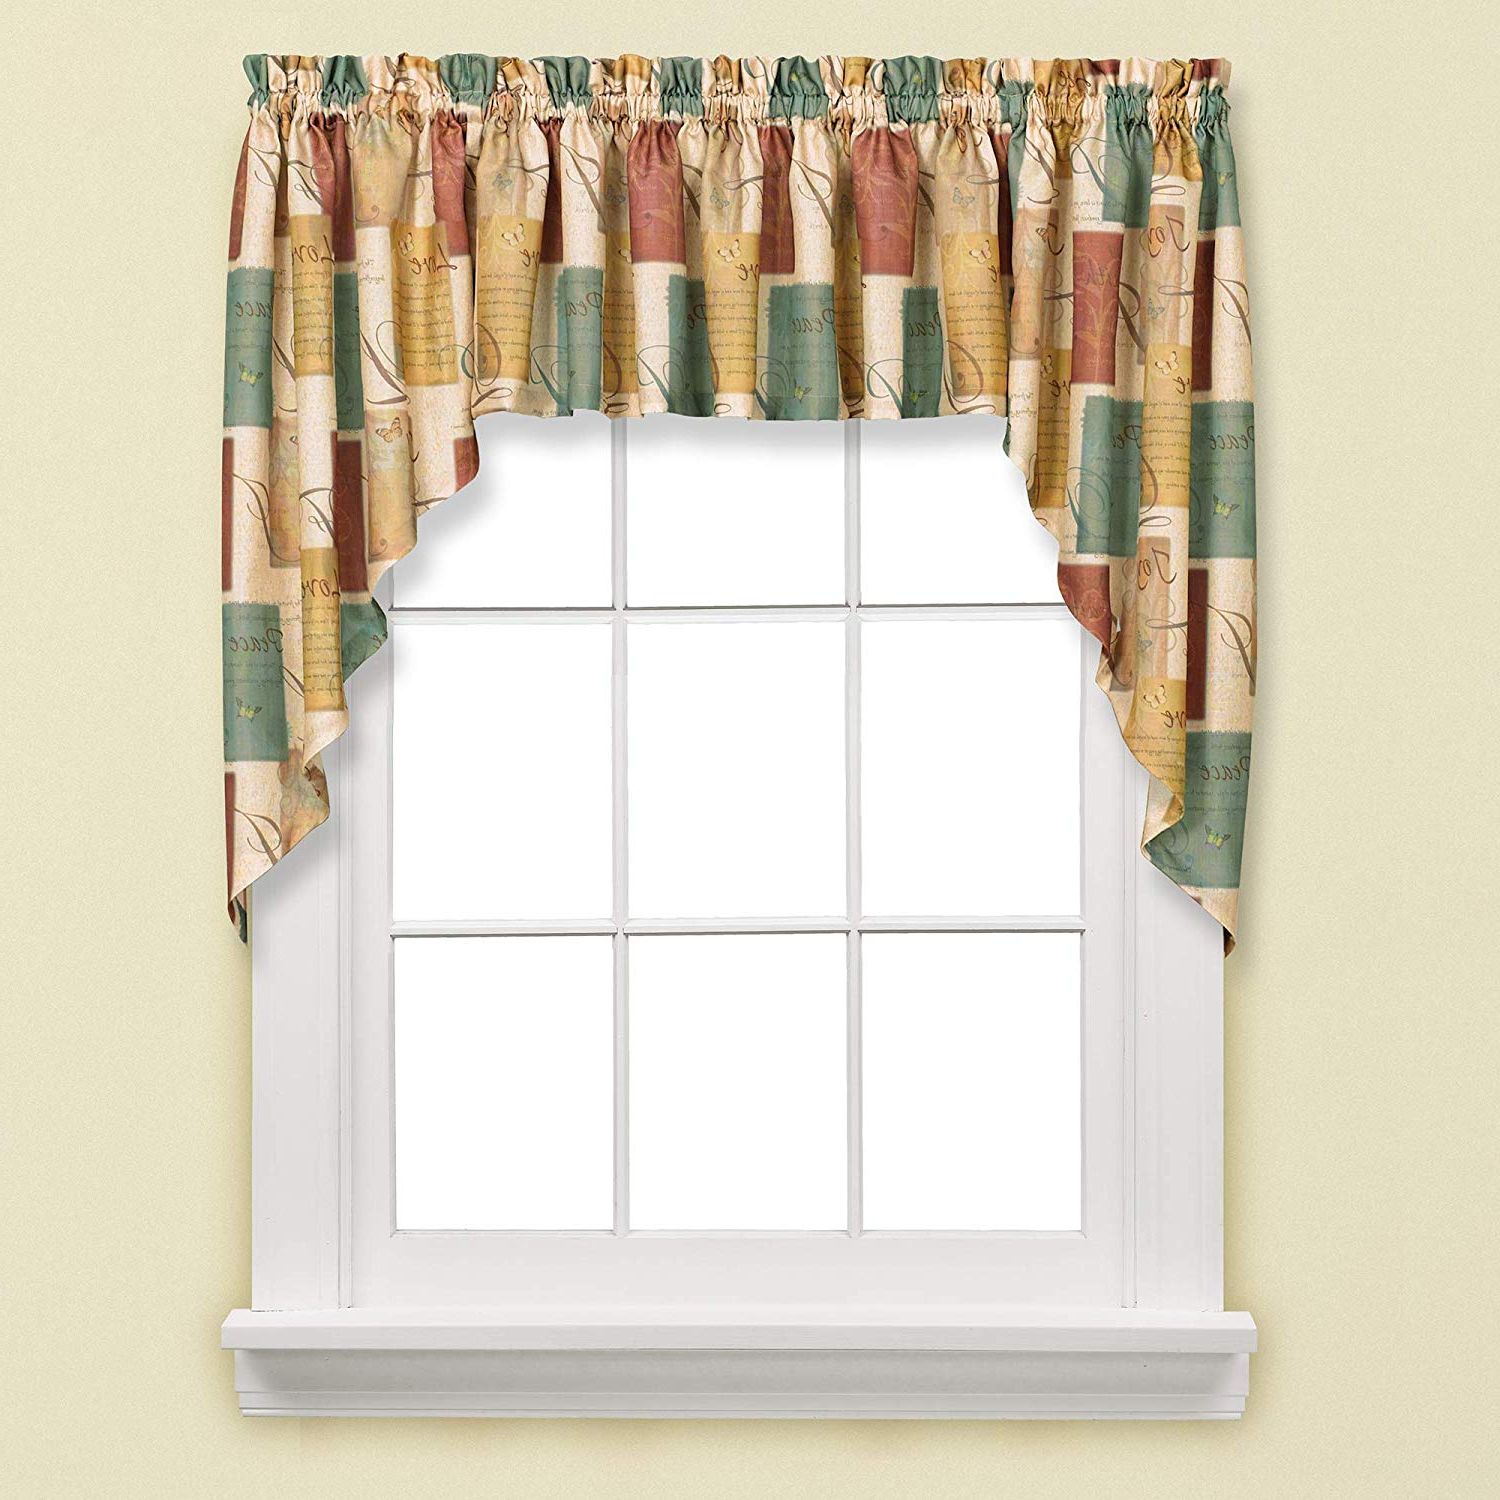 Tranquility Curtain Tier Pairs In Current Skl Homesaturday Knight Ltd (View 1 of 20)